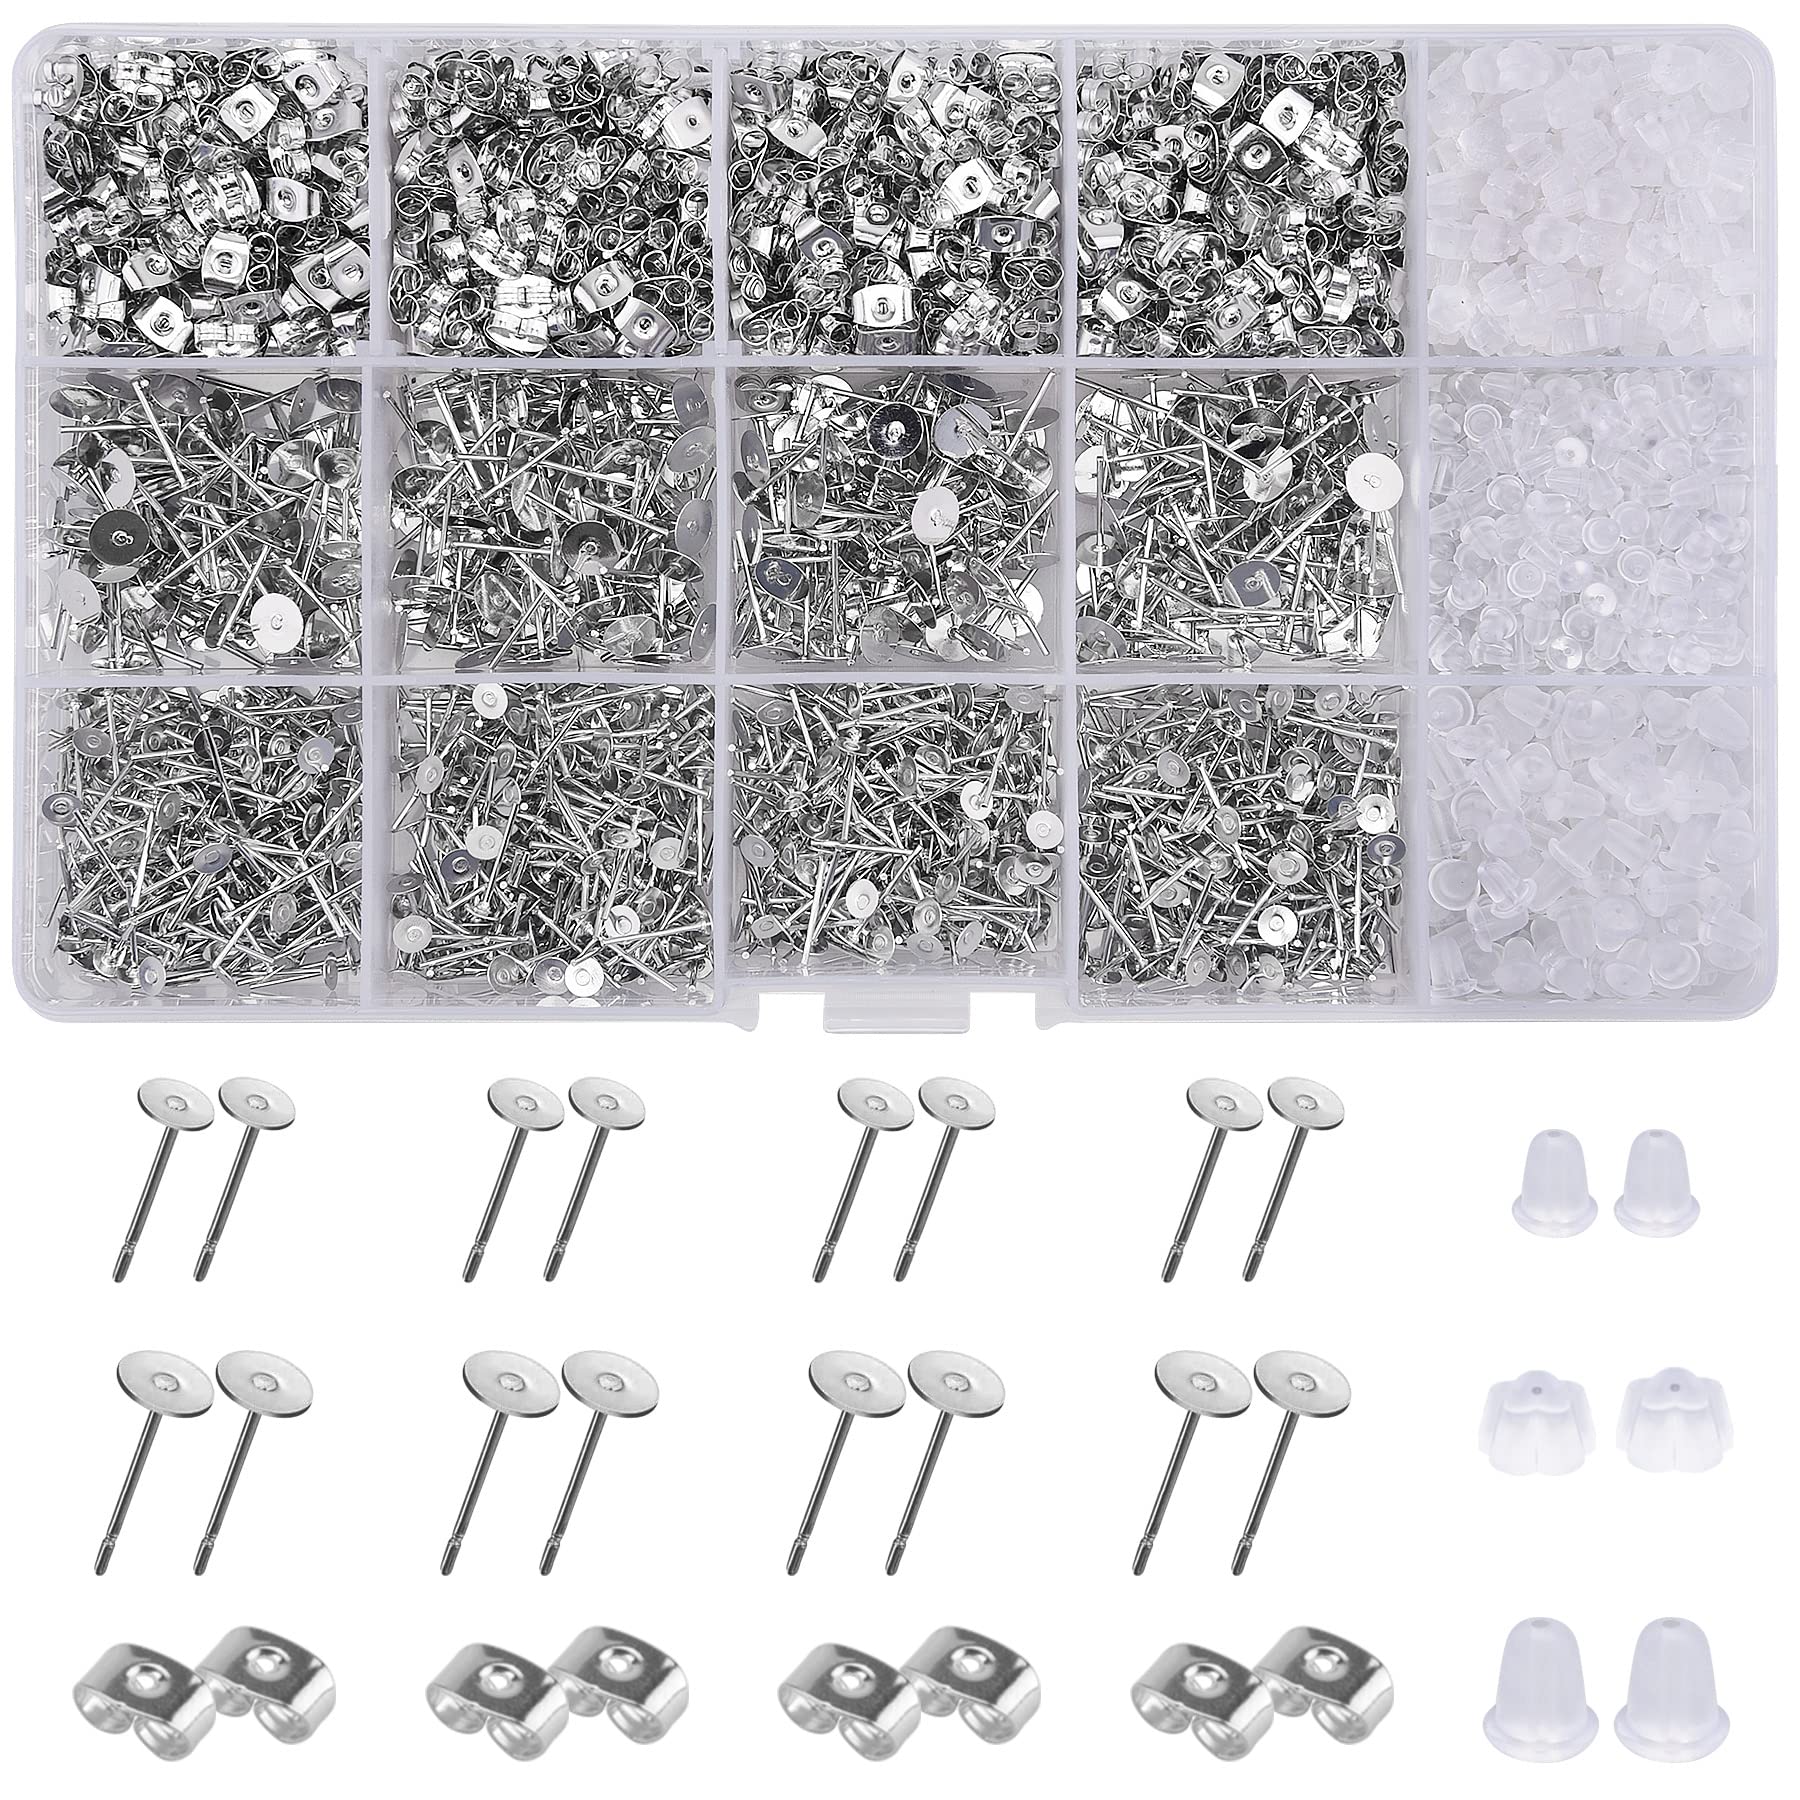 BQTQ 2600 Pieces Earring Posts and Backs Earring Studs for Jewelry Making  Butterfly Earring Backs and Rubber Earring Backs with